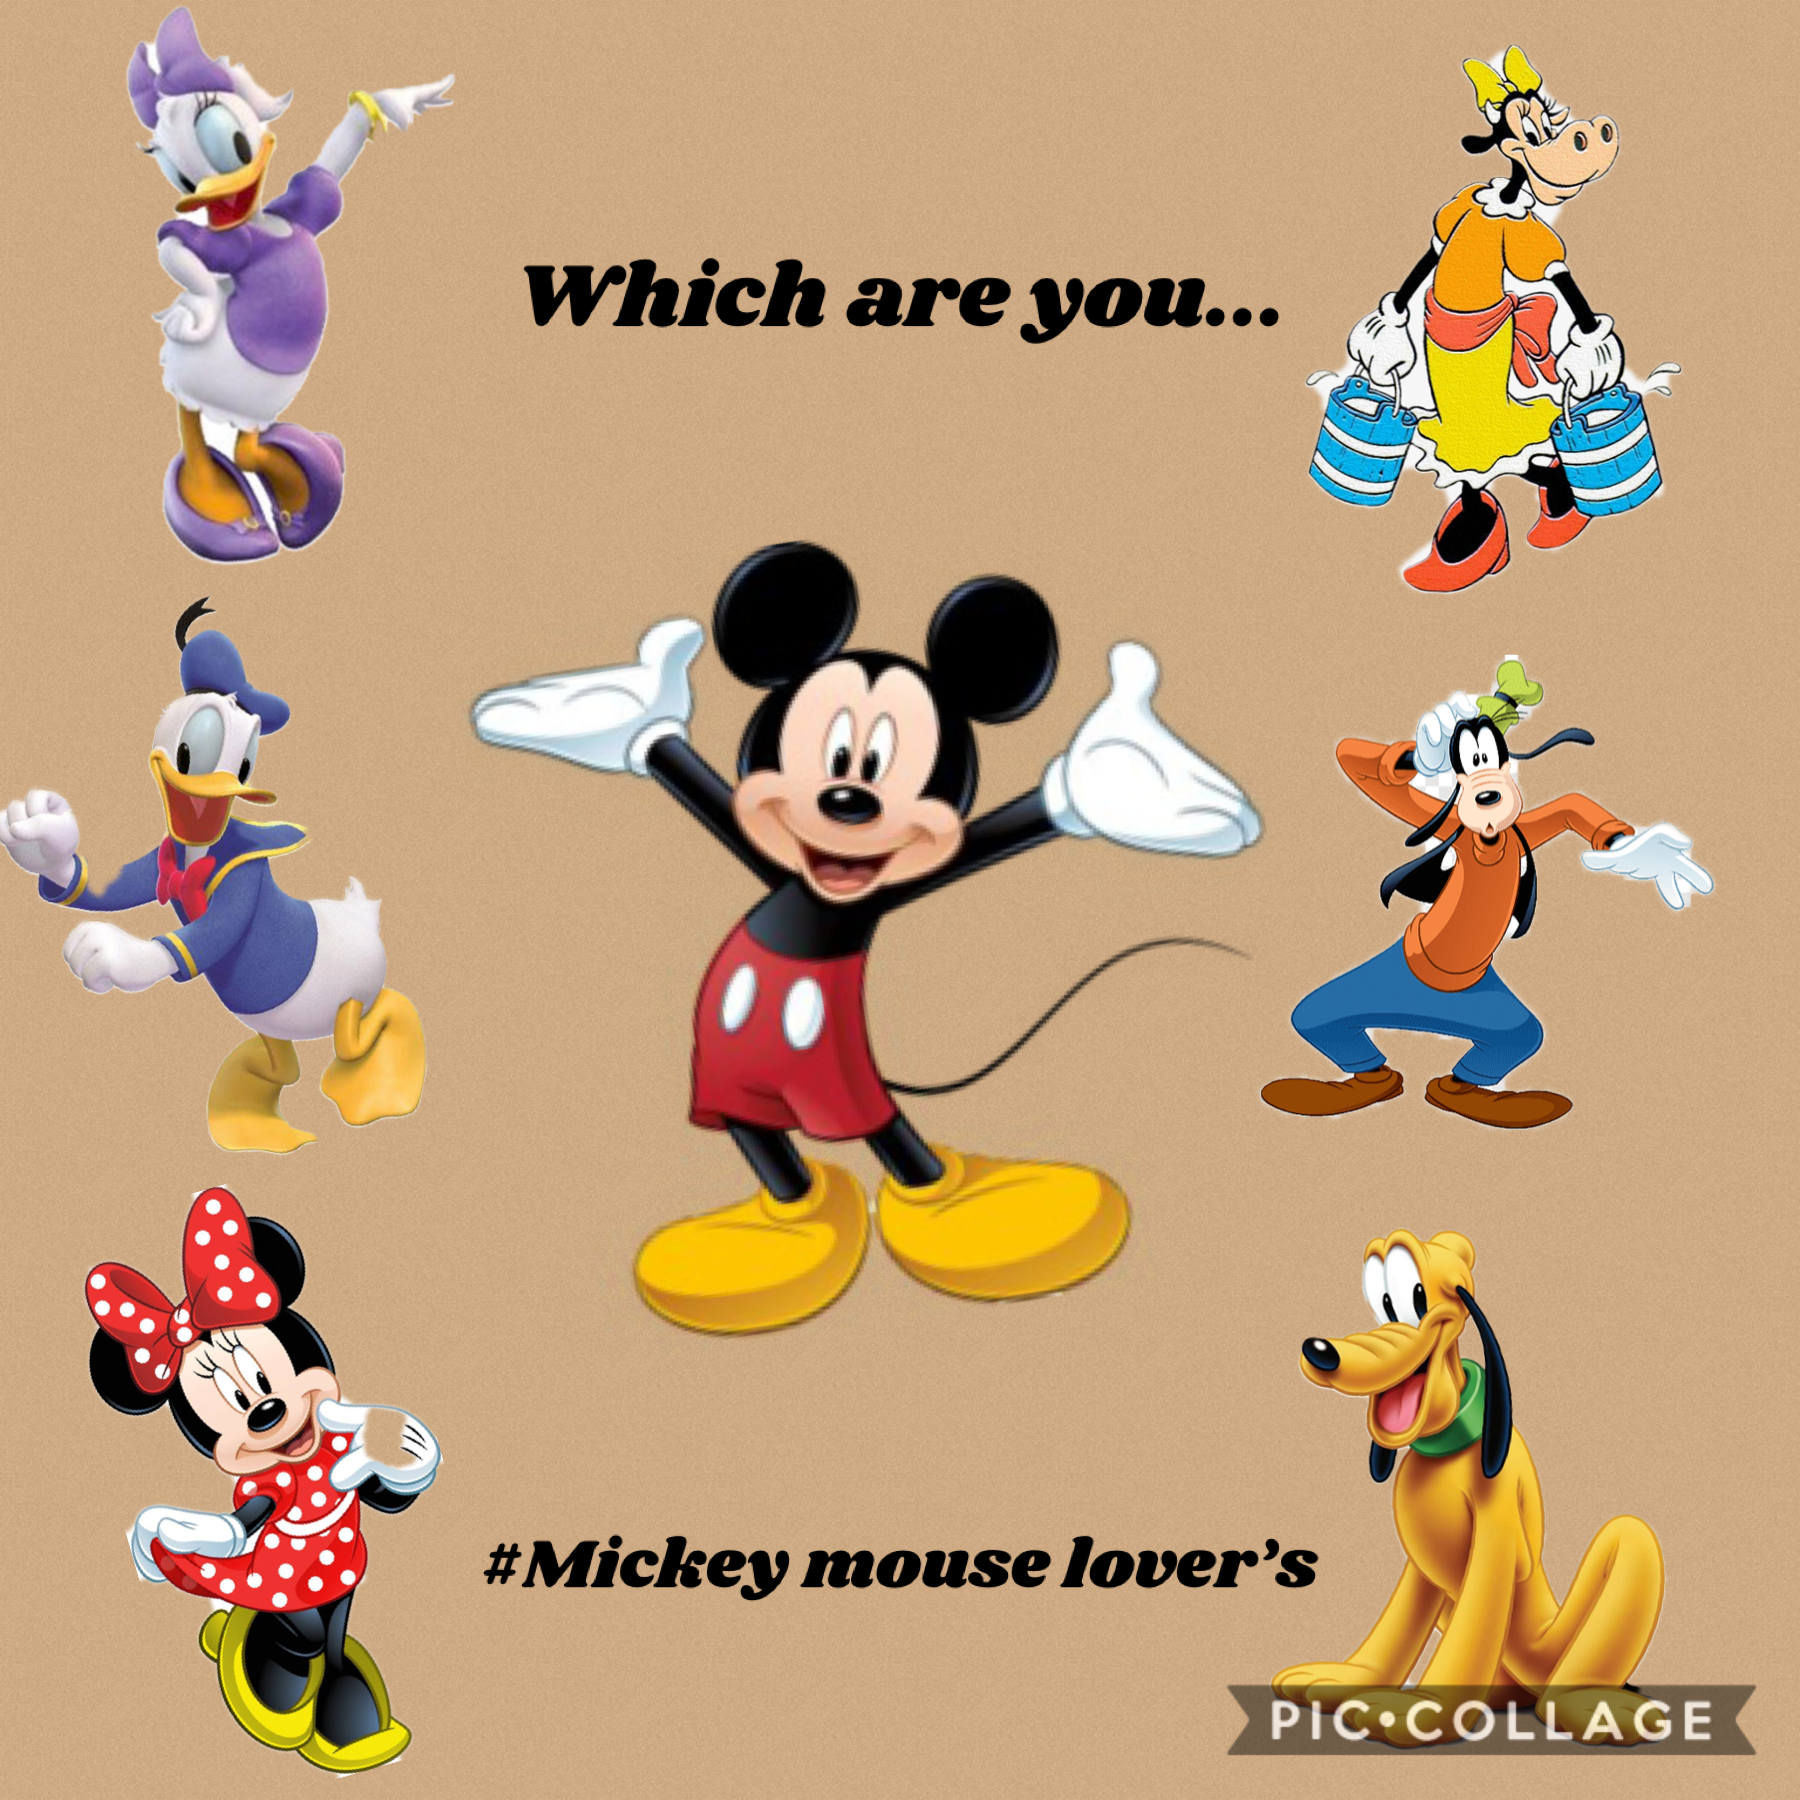 I absolutely love 💕 Mickey Mouse 
And I wanted to know which Mickey Mouse character you prefer? I have nooooo idea which one I would choose but if I could meet one it would be Mickey..... don’t tell them. 🤫